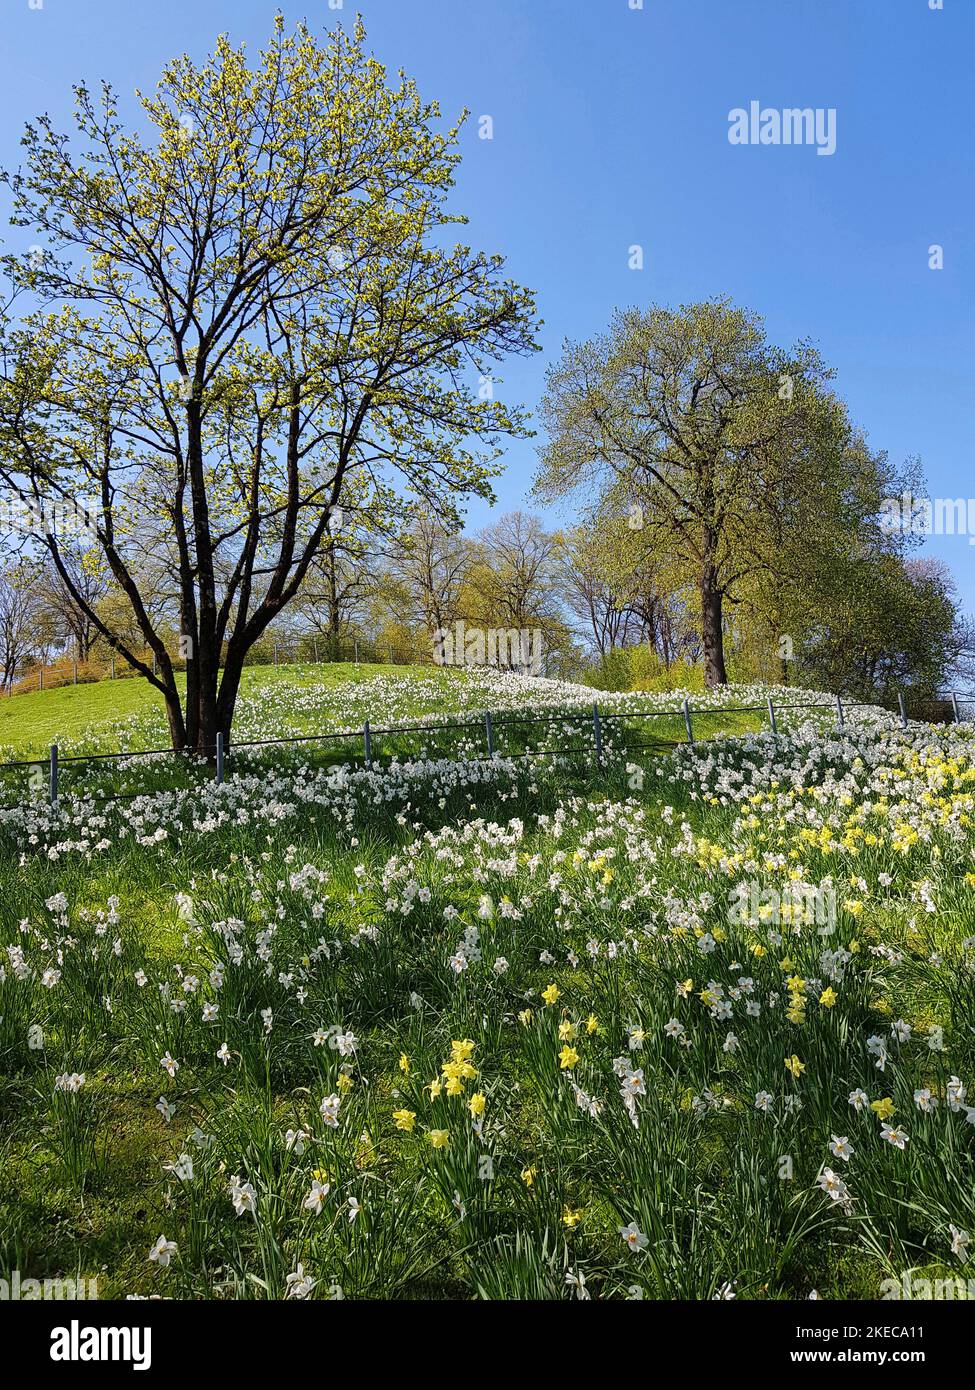 Westpark in spring. The 60-hectare park was created in 1983 for the International Horticultural Exhibition. It offers many recreational opportunities for games and sports, walking and cycling paths, barbecue facilities, flower and perennial gardens, gastronomy, East Asian ensemble, spring bloomers, daffodils on the meadows. Stock Photo